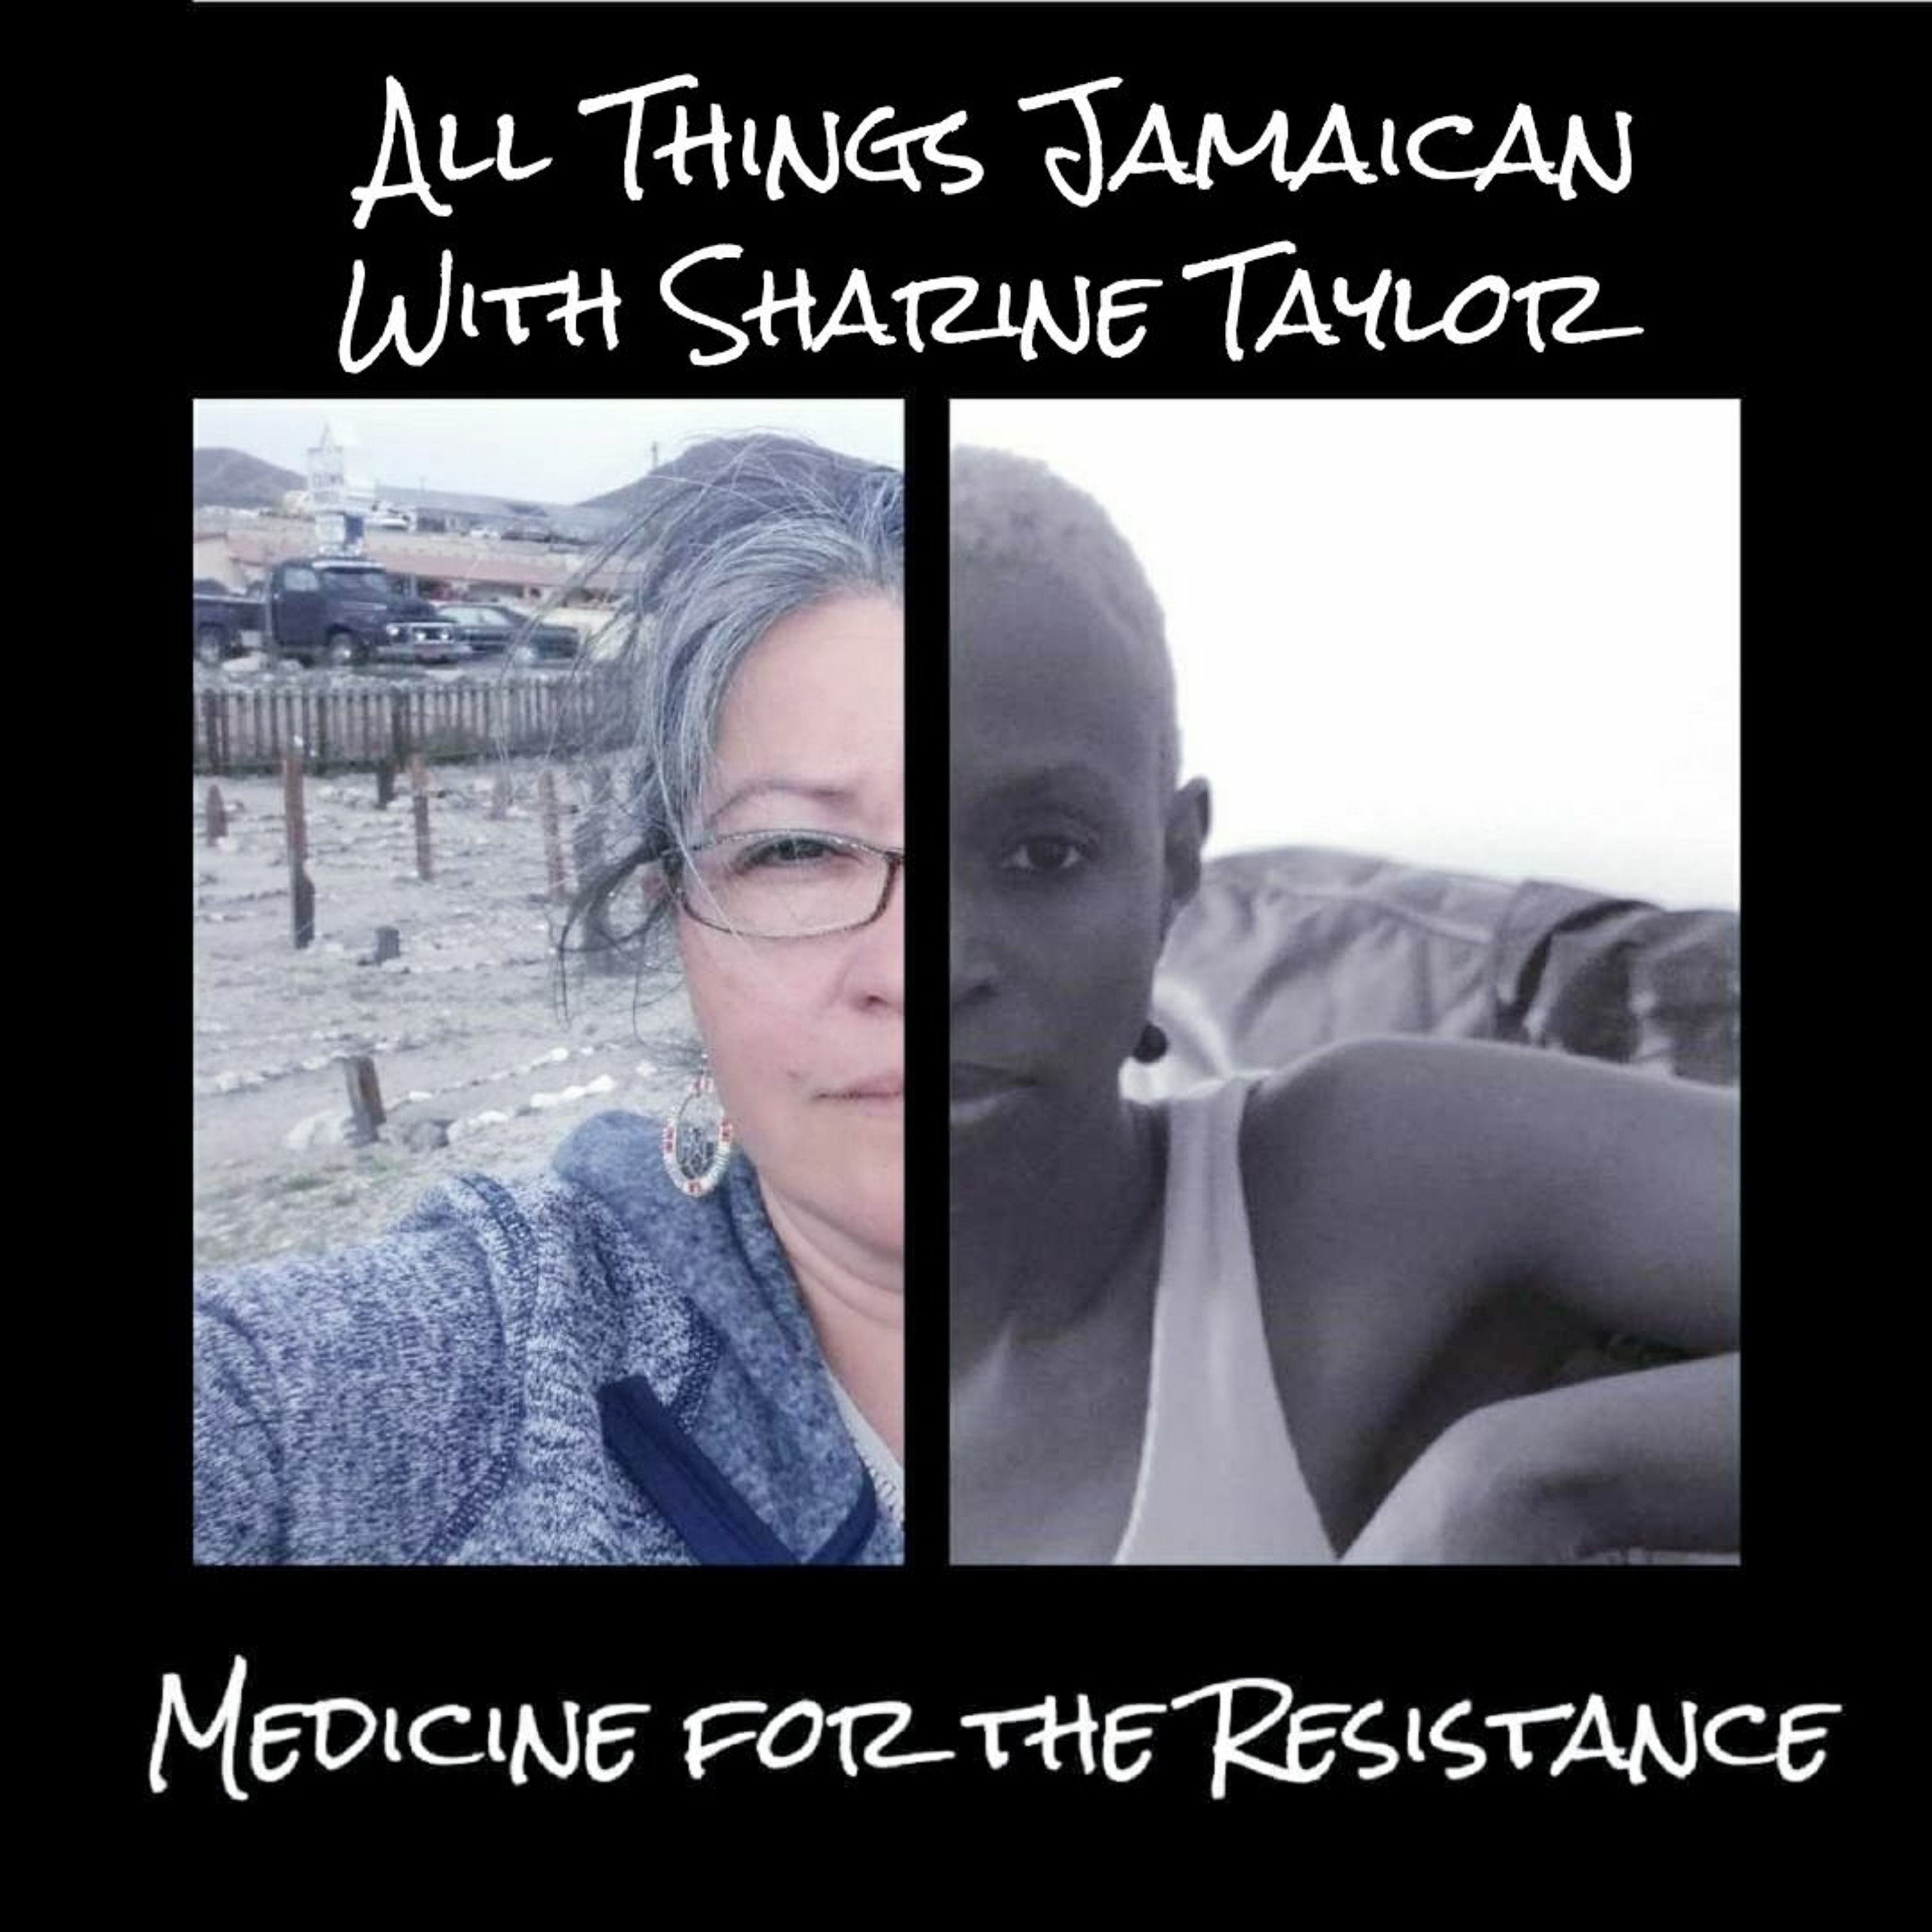 All things Jamaican with Sharine Taylor